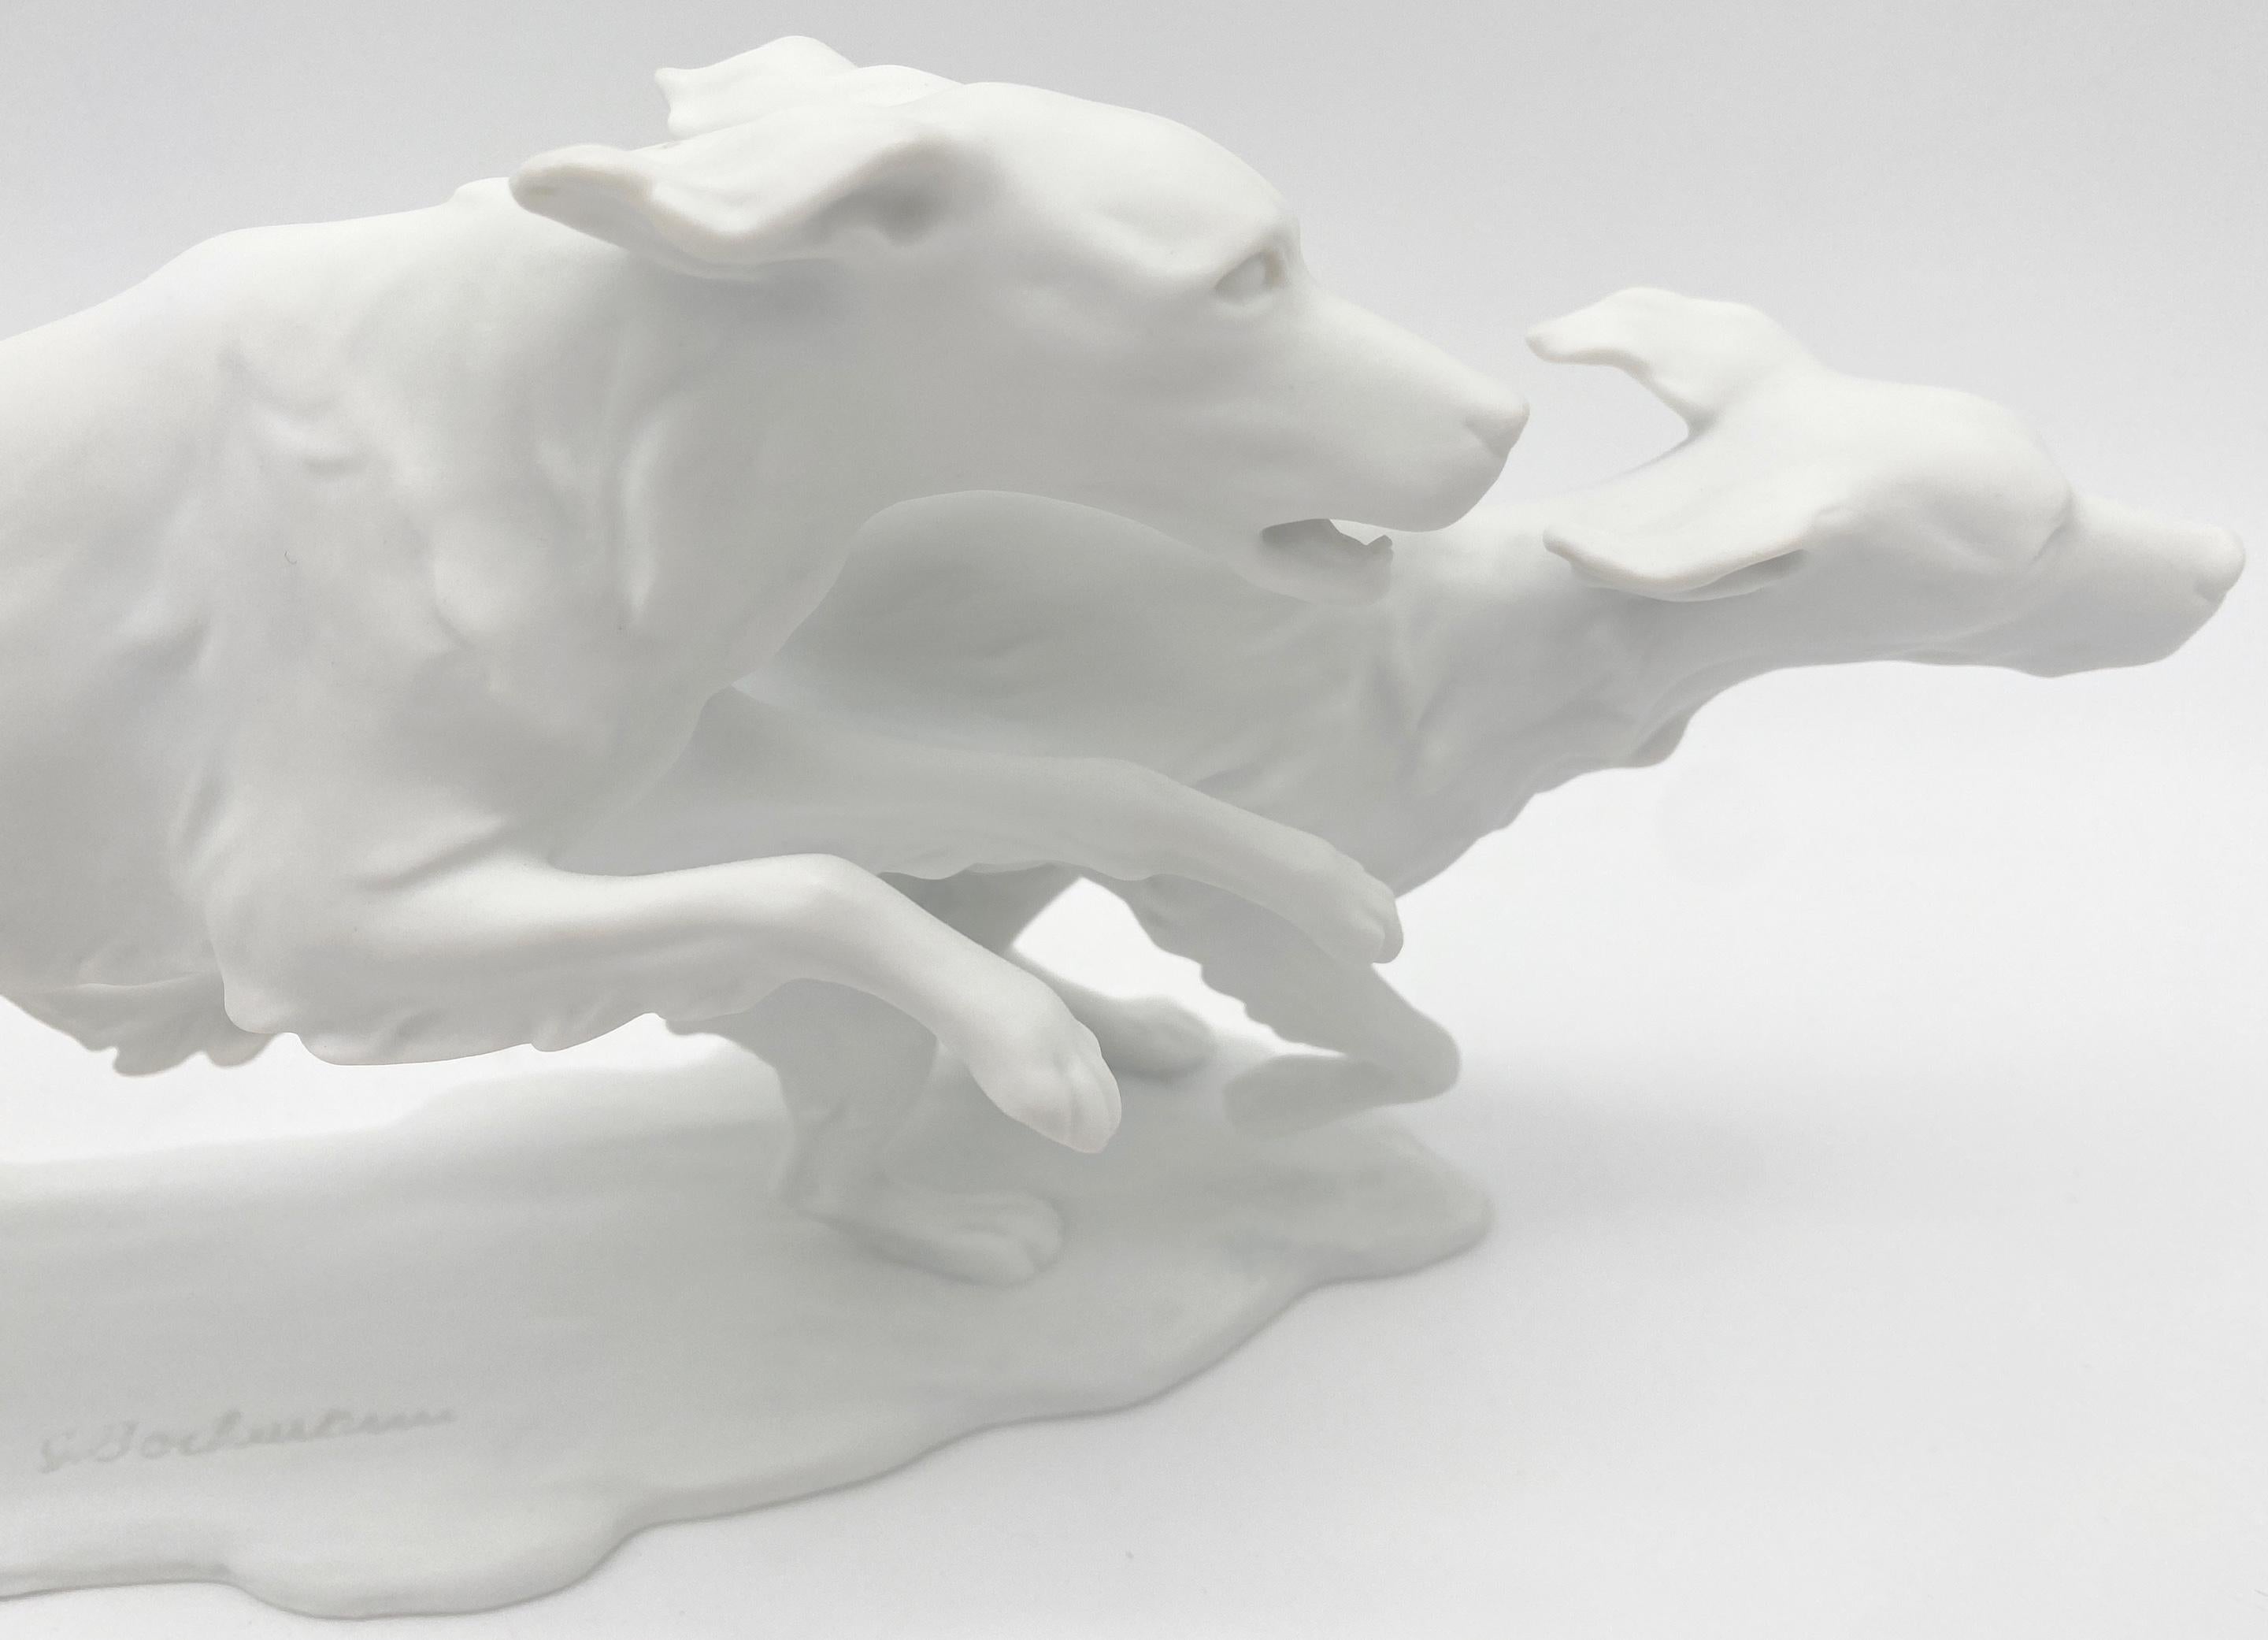  Kaiser Bisque Porcelain 'Running Dogs' by G. Bochuraun  In Good Condition For Sale In West Palm Beach, FL